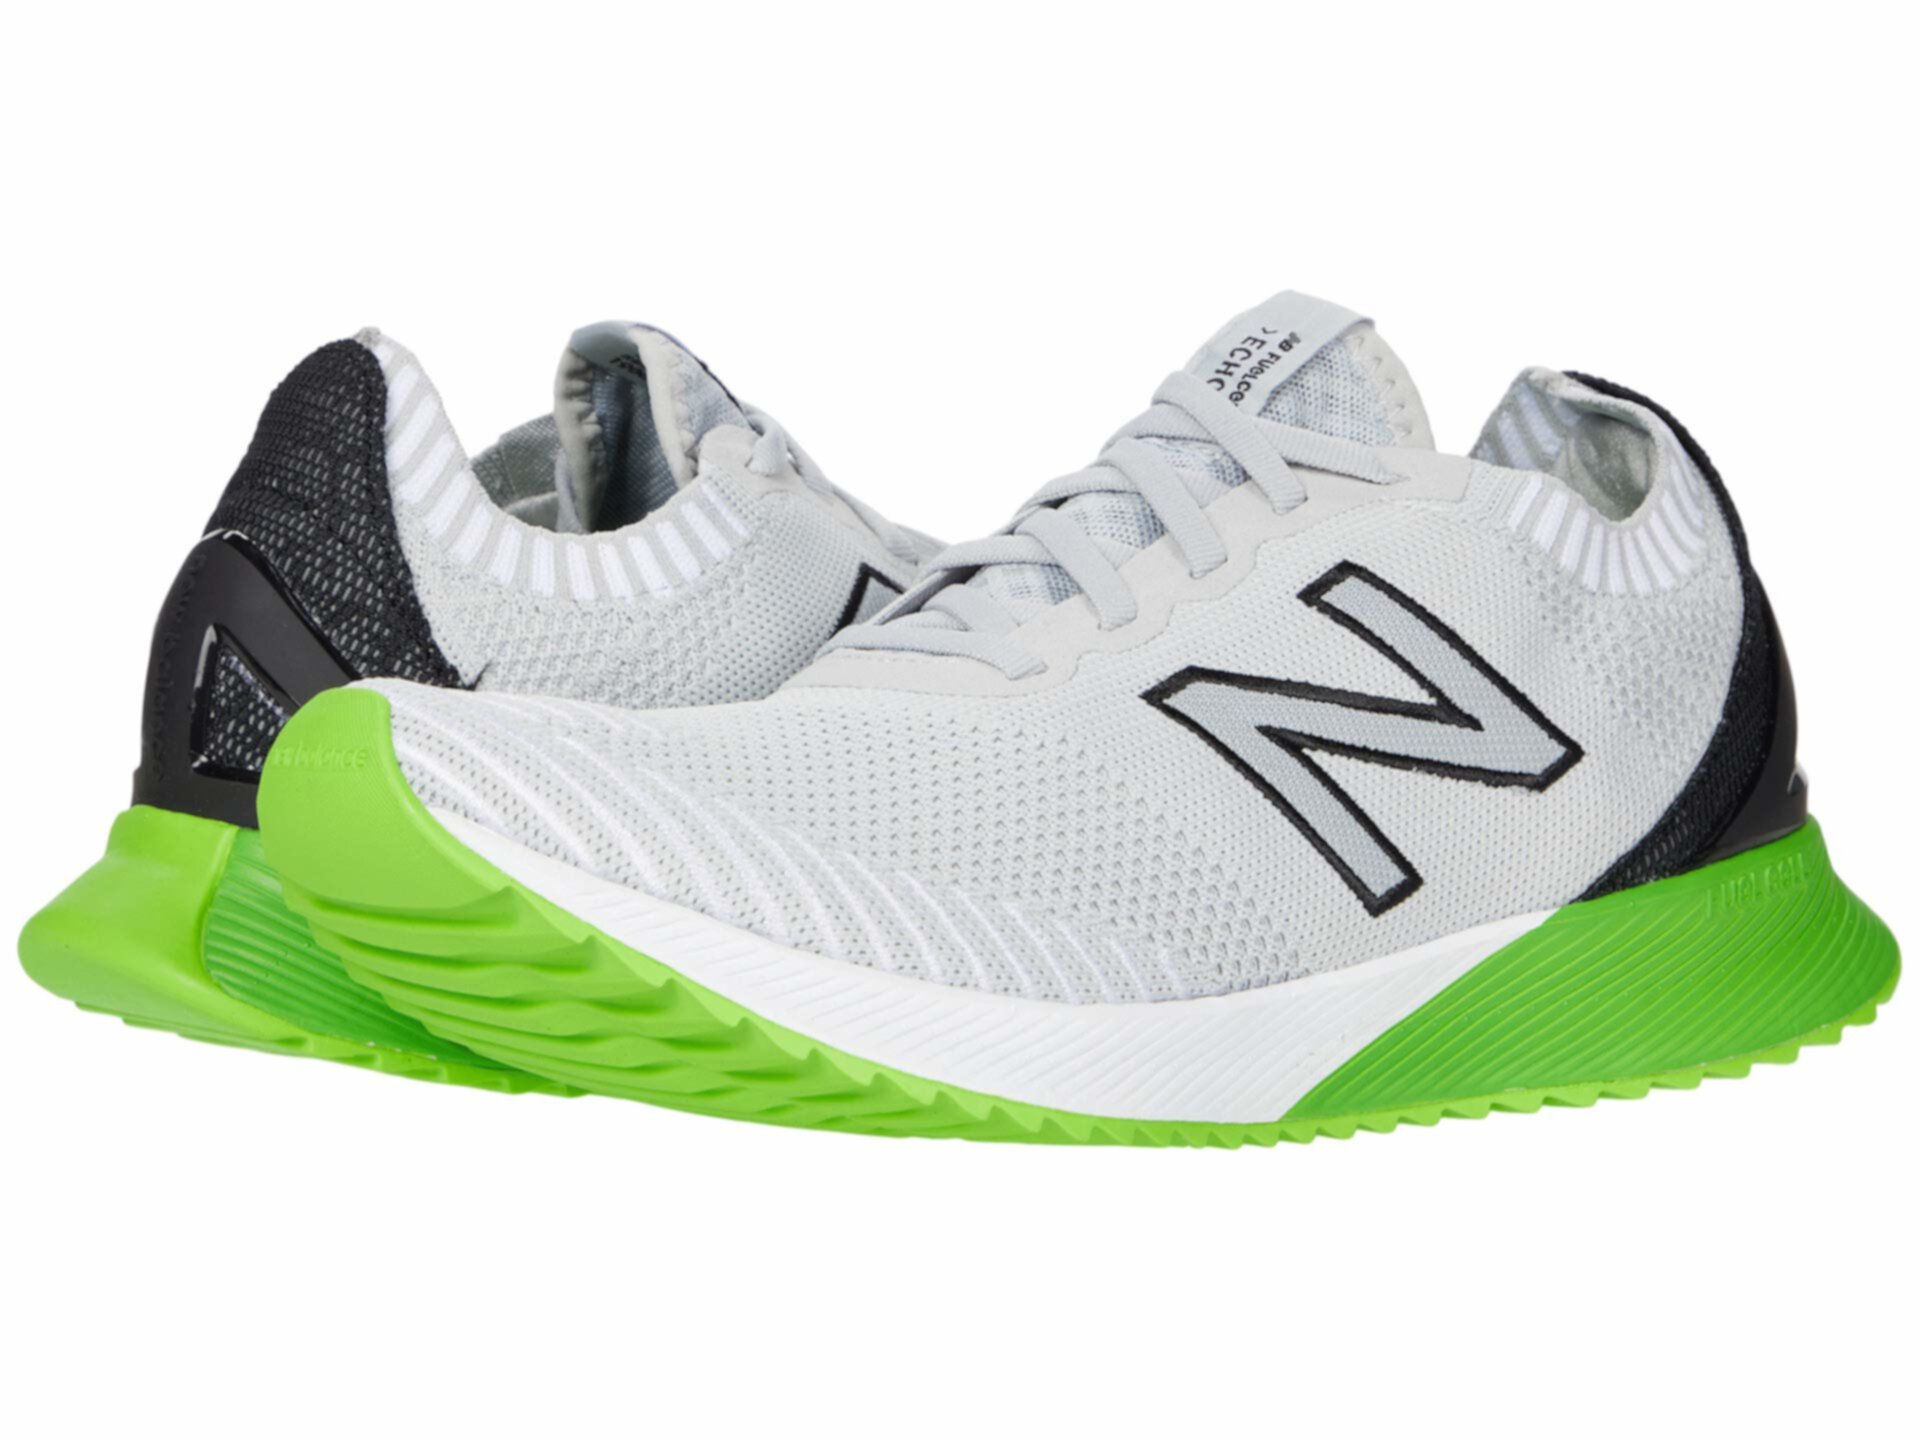 Fuelcell Echo New Balance